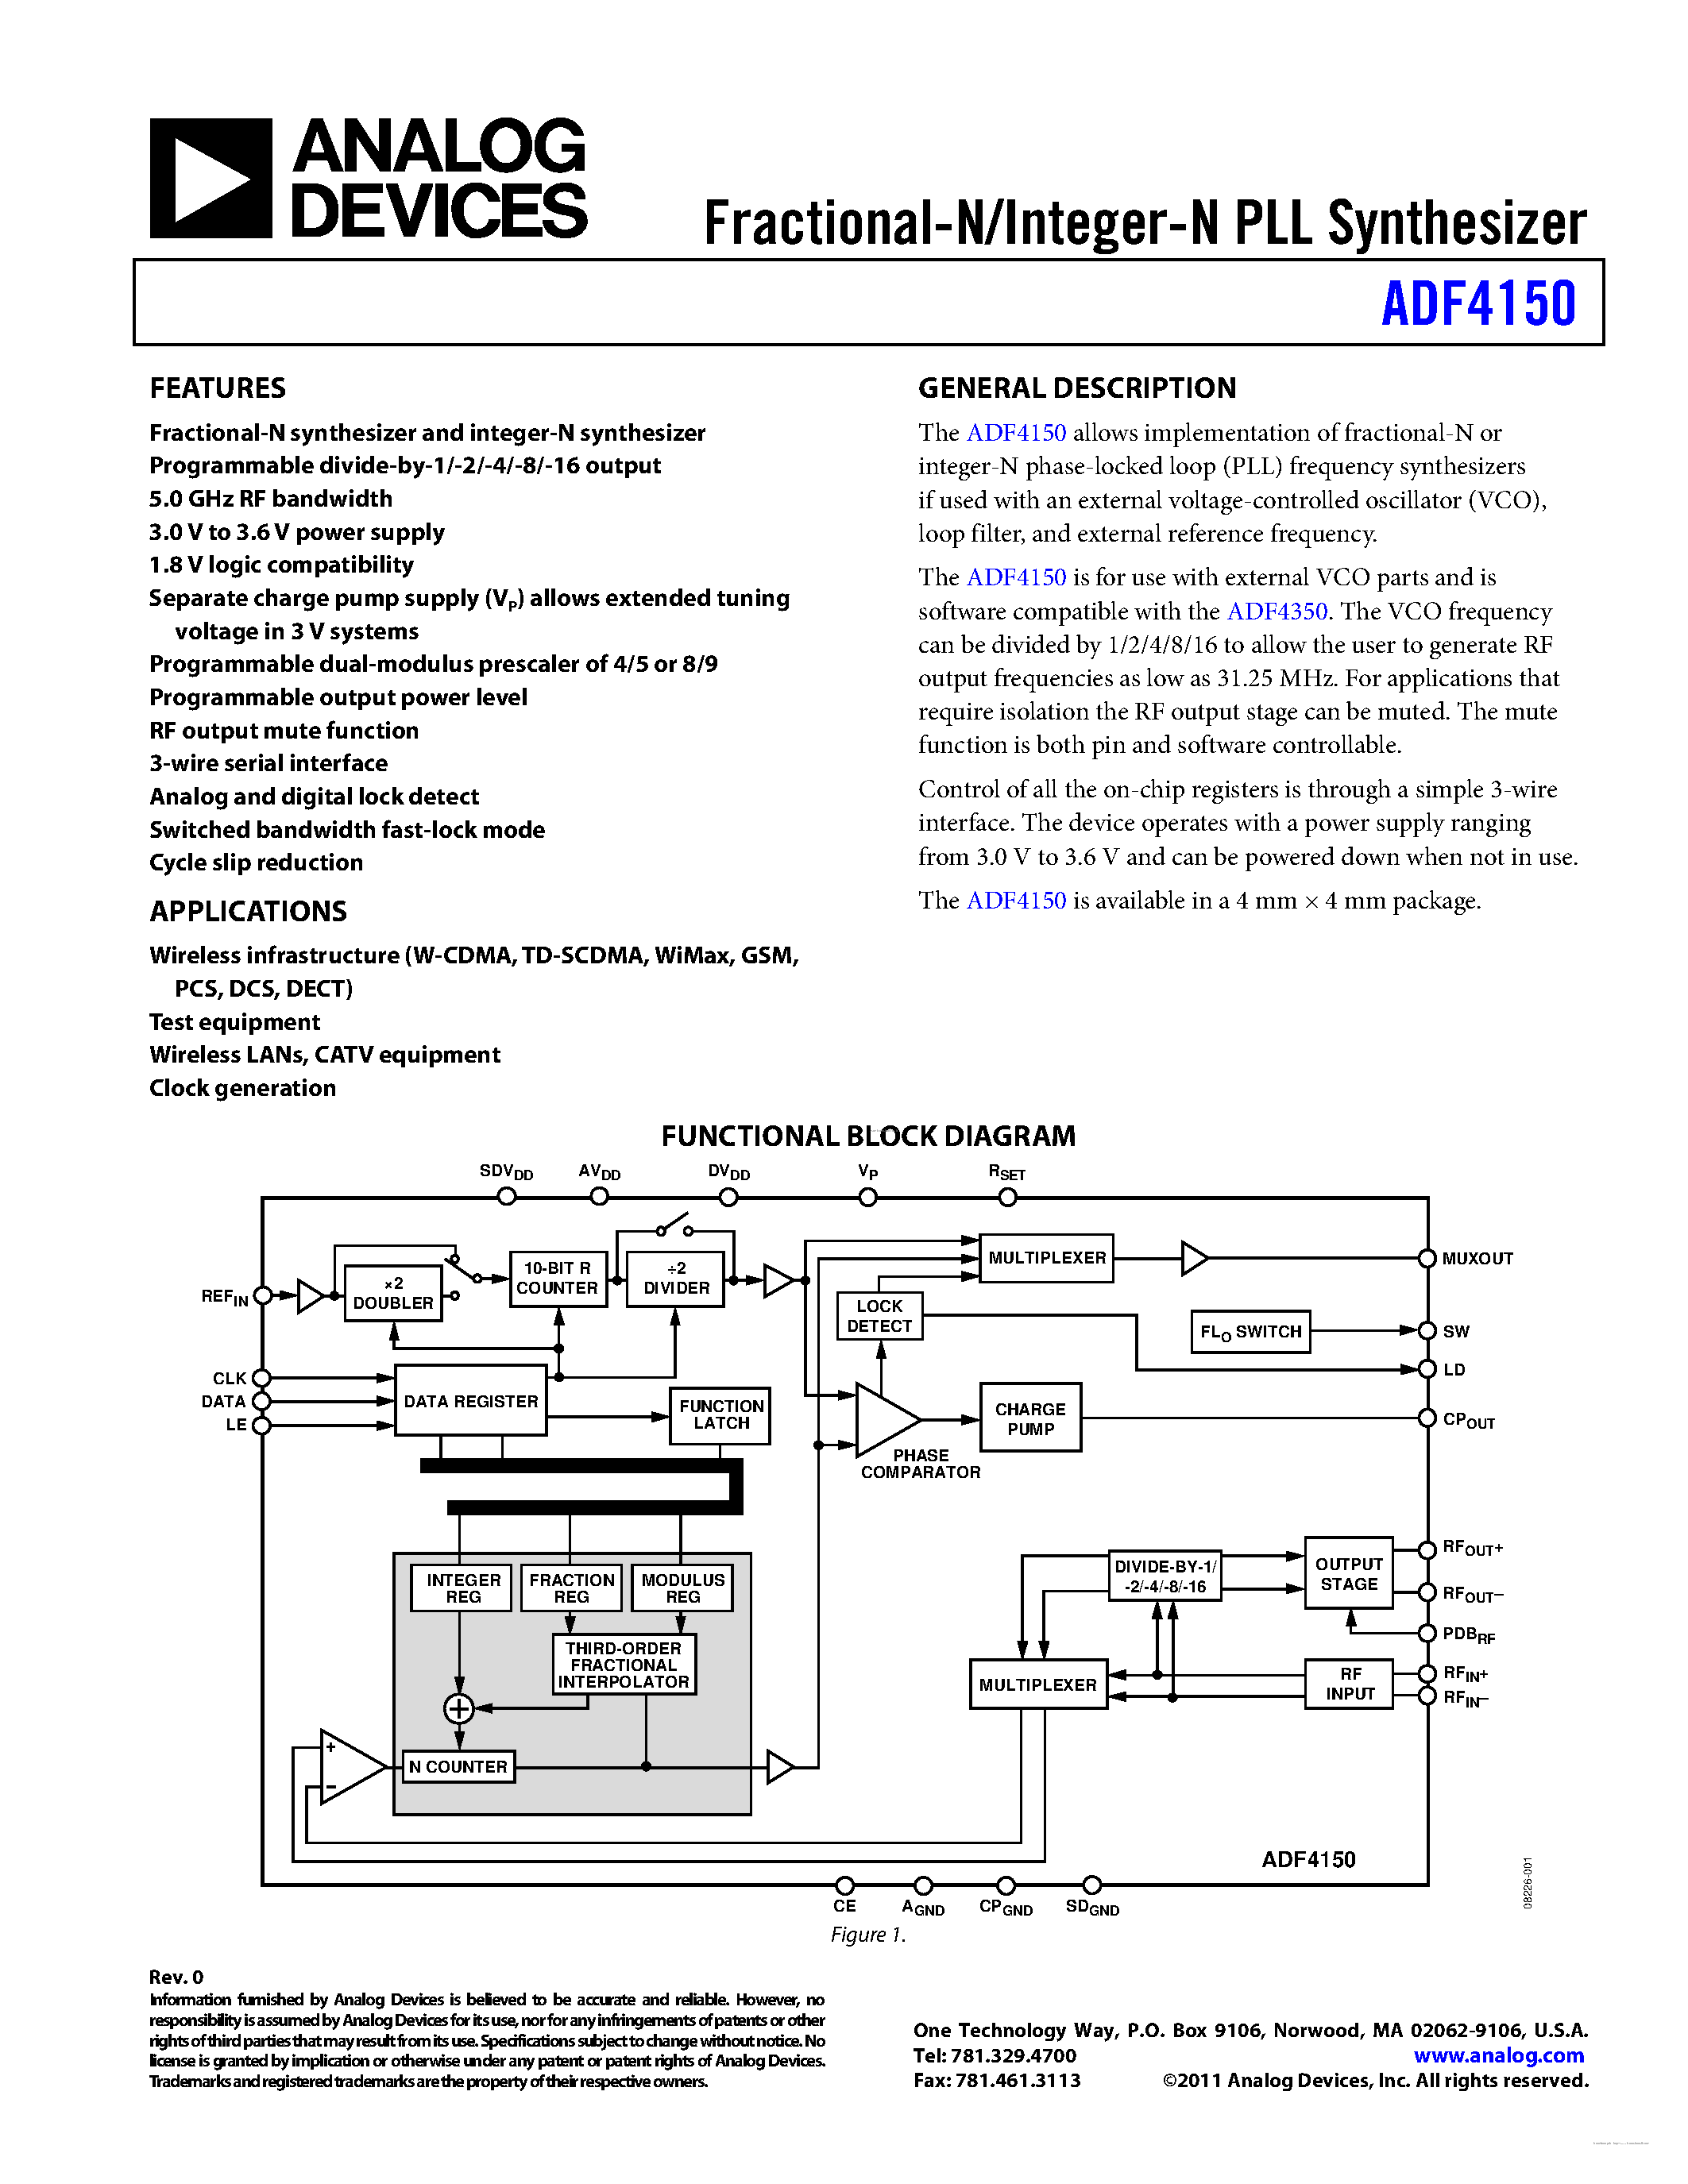 Datasheet ADF4150 - Fractional-N/Integer-N PLL Synthesizer page 1